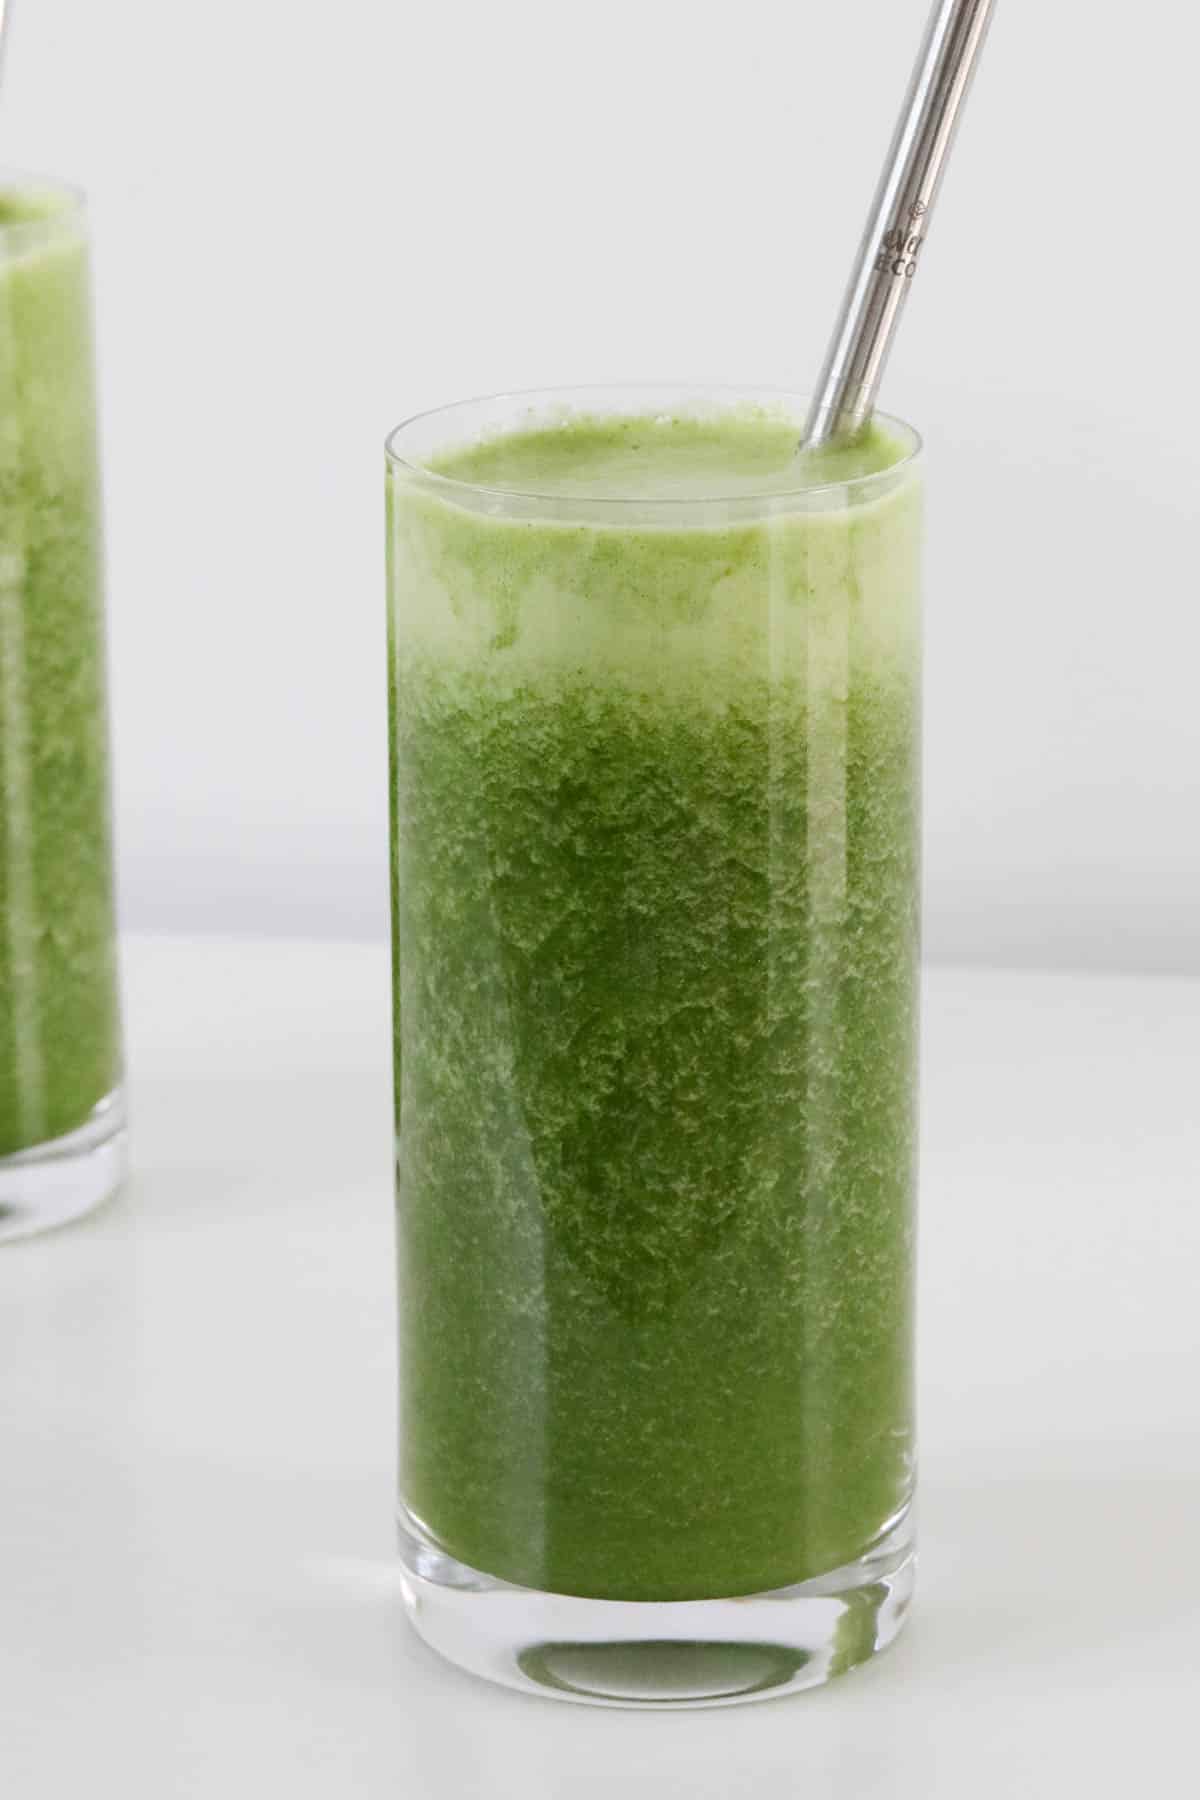 A glass of a green juice.